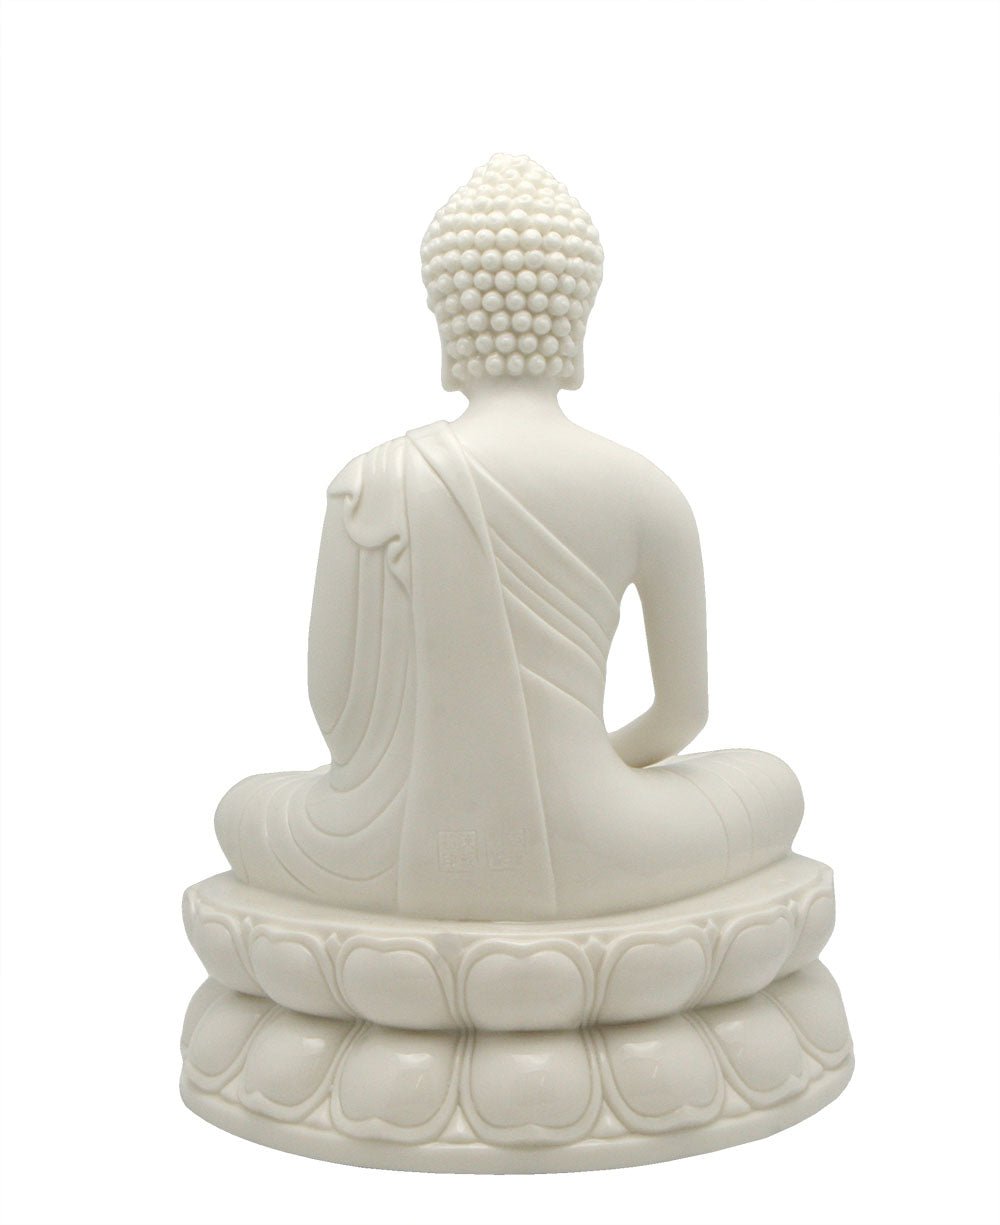 White Porcelain Meditating Buddha Statue, 11 Inches - Sculptures & Statues